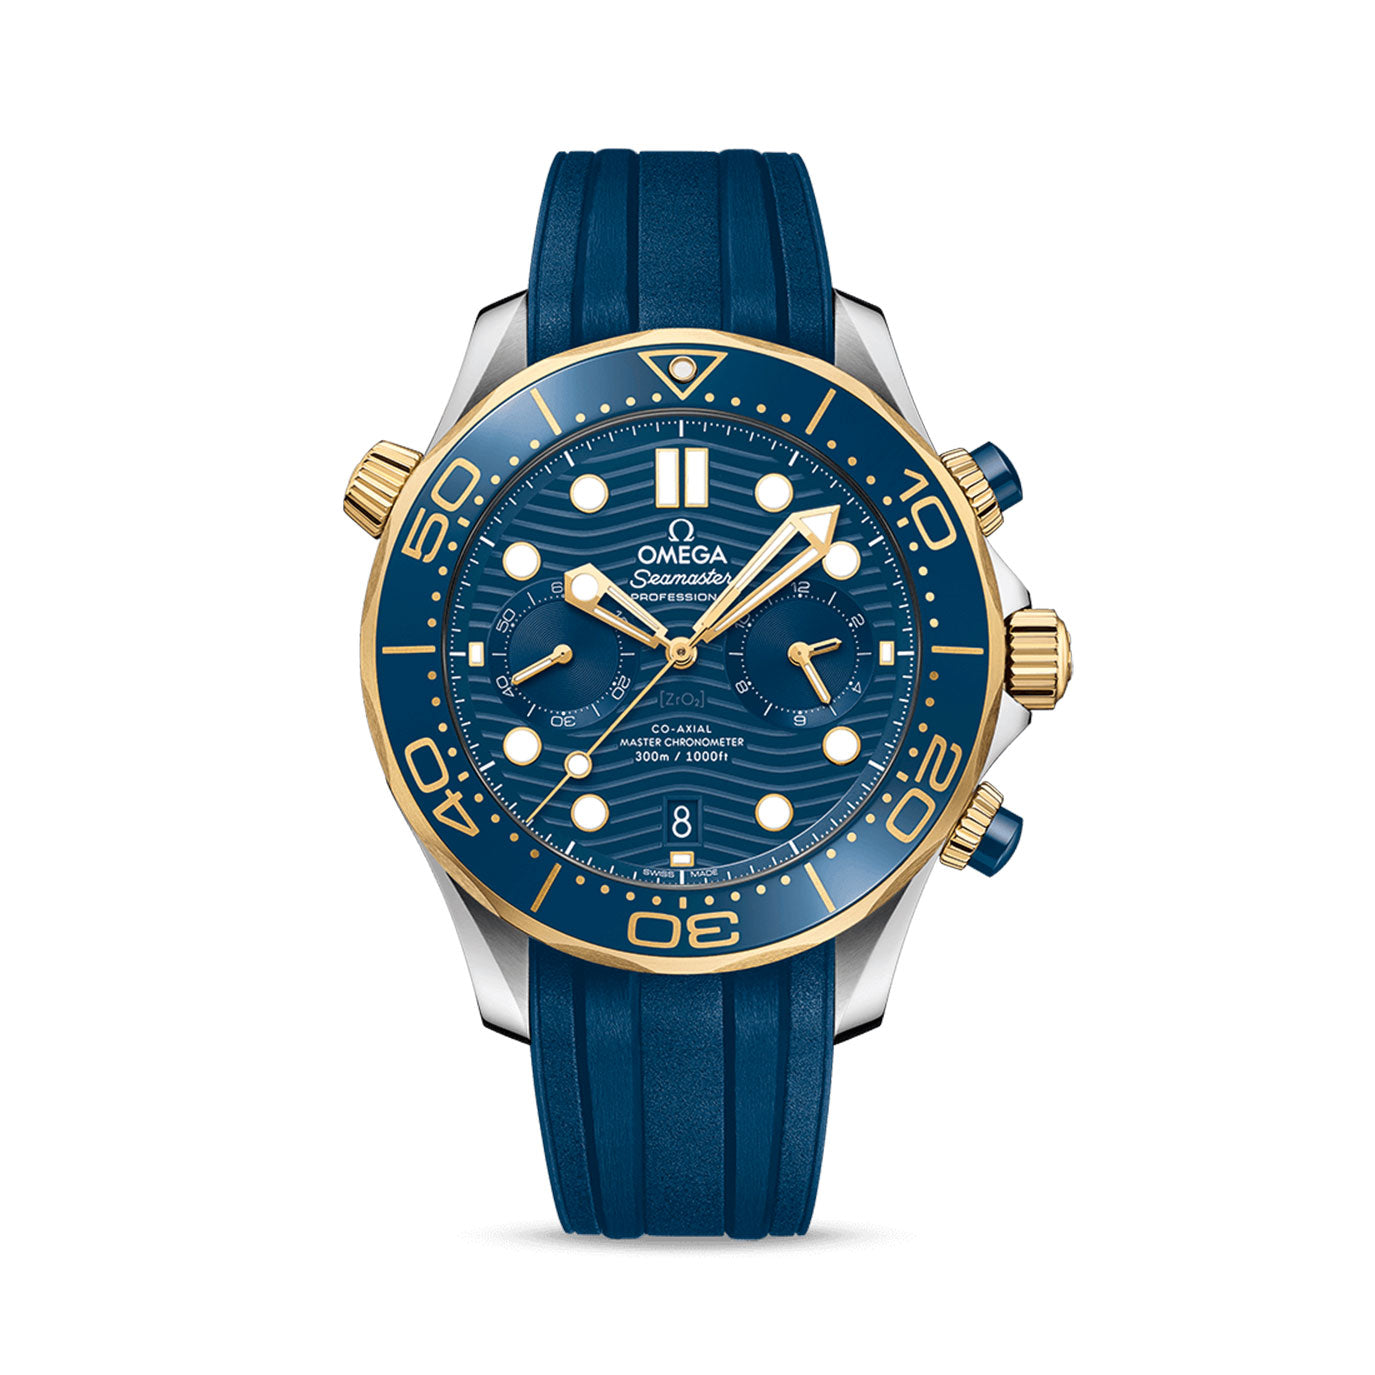 Omega Seamaster DIVER 300M CO‑AXIAL MASTER CHRONOMETER CHRONOGRAPH Ref# 210.22.44.51.03.001